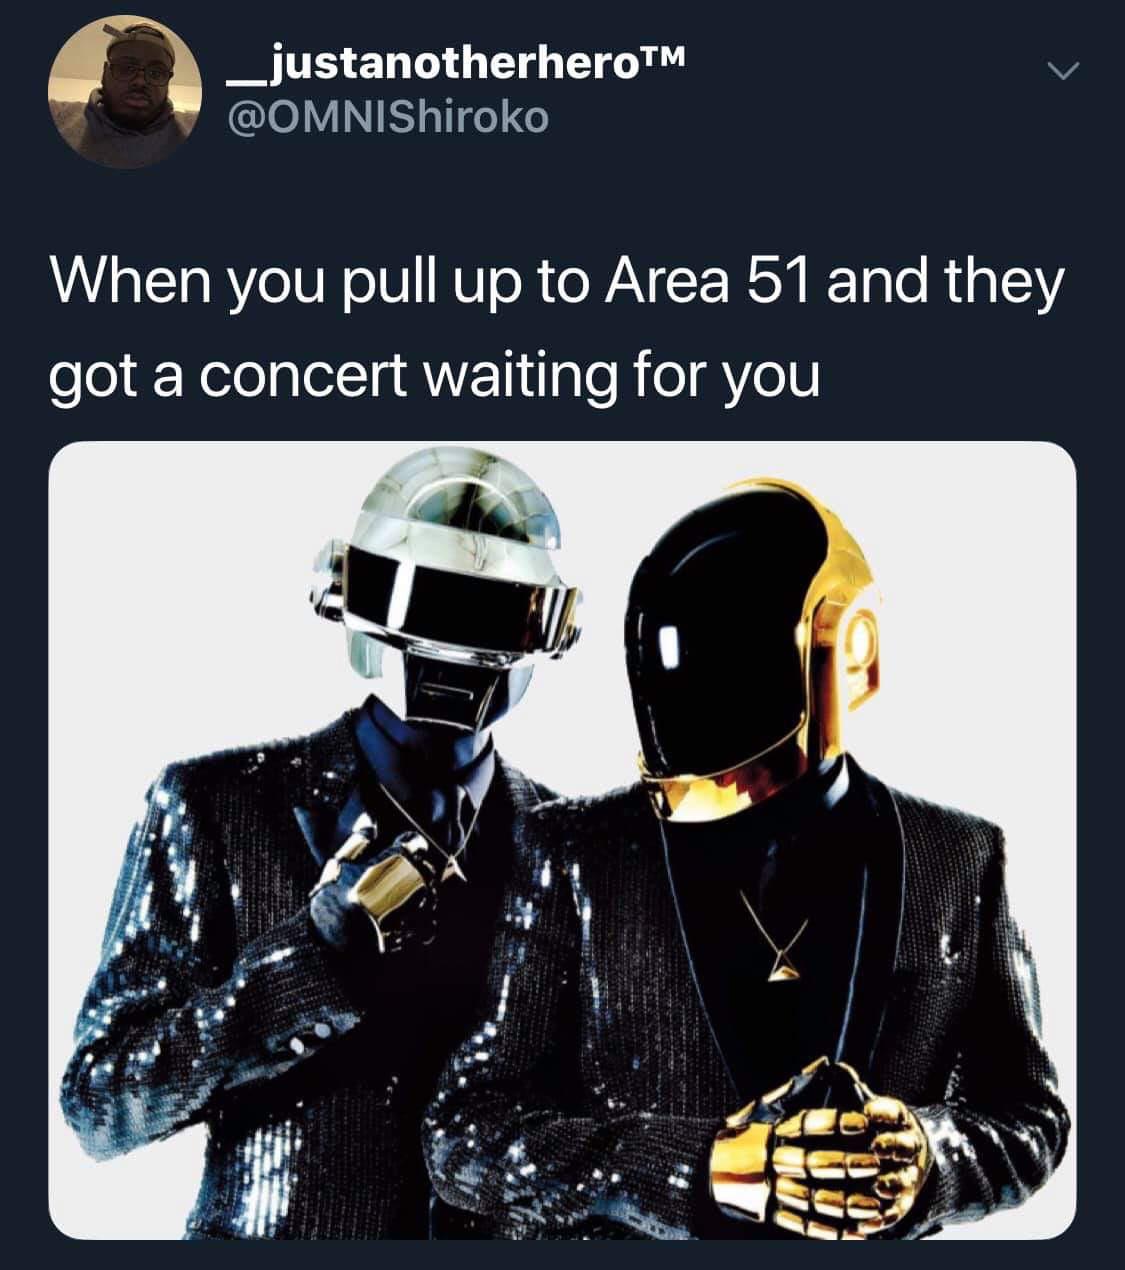 daft punk - _justanotherheroTM When you pull up to Area 51 and they got a concert waiting for you